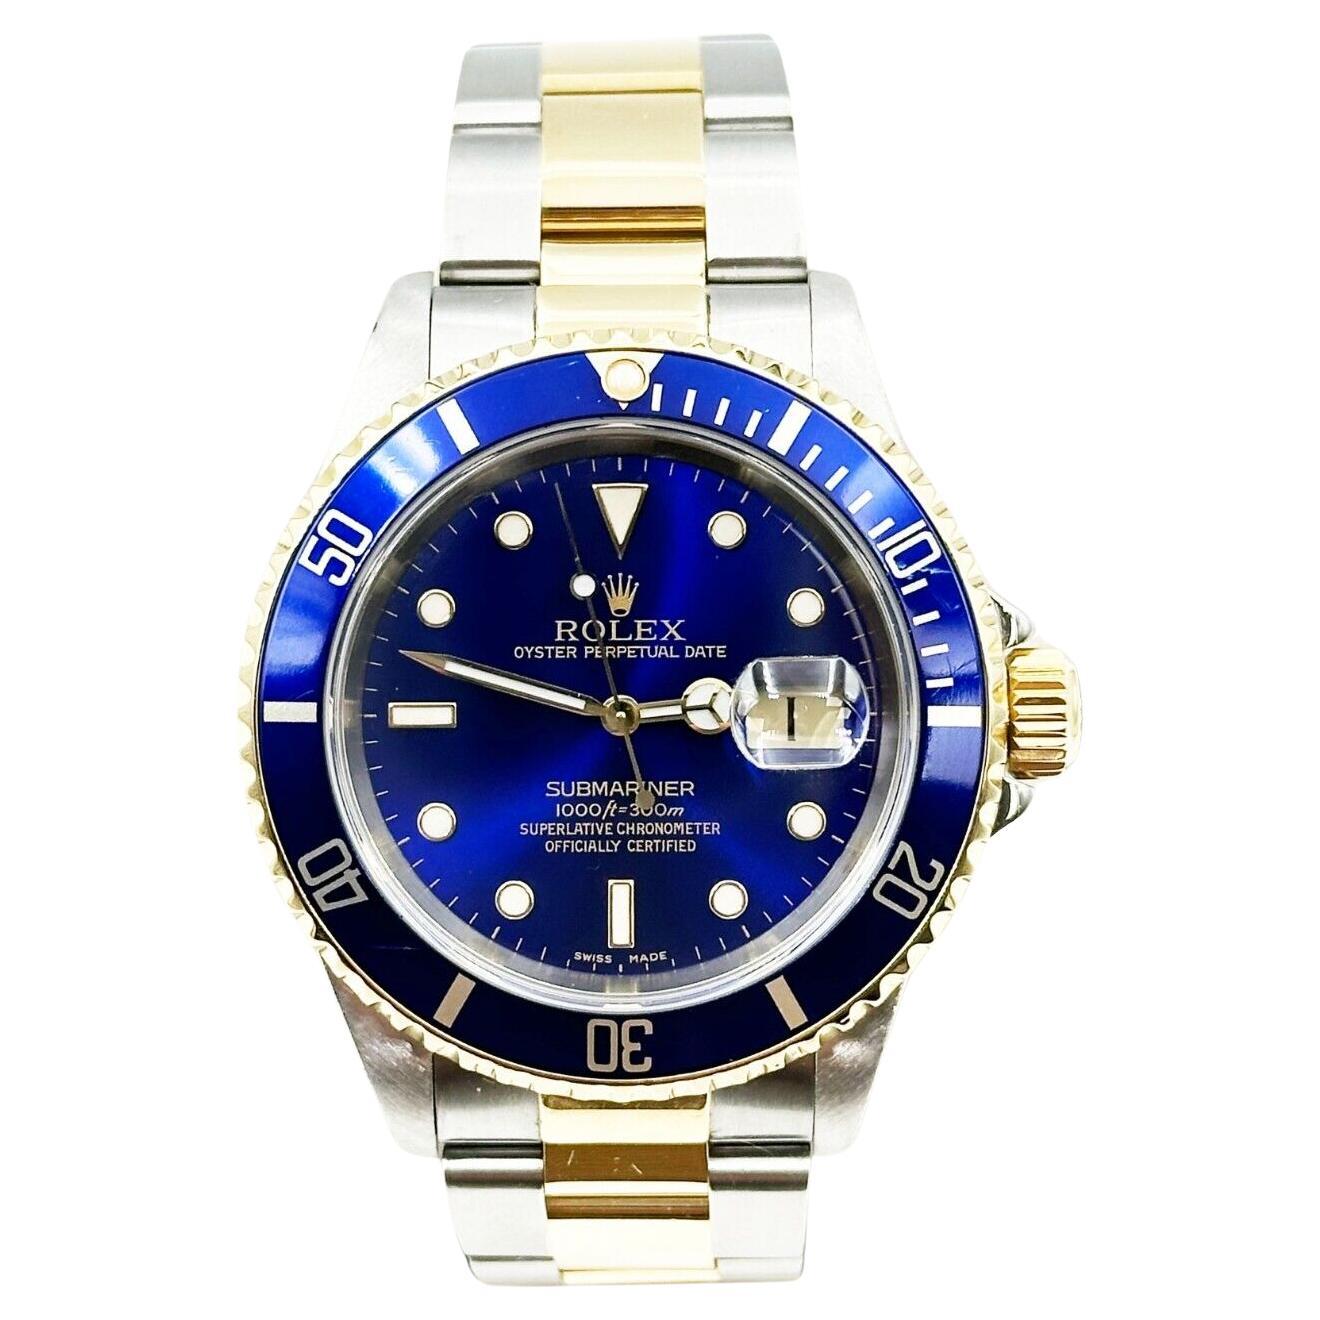 Rolex 16613 Submariner Blue Dial 18K Yellow Gold Stainless Steel